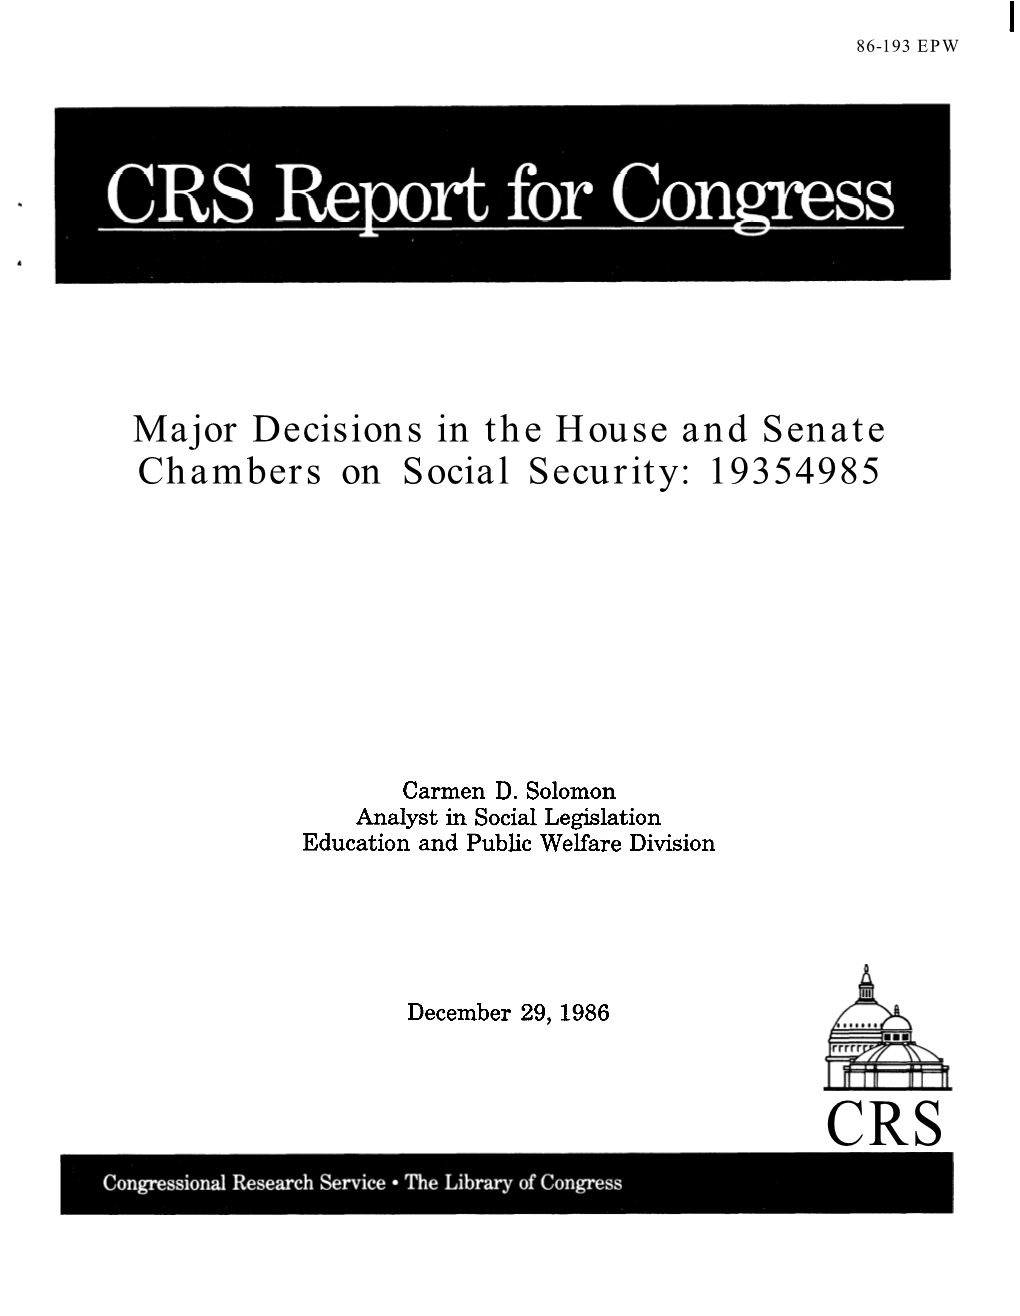 Crs Report: Major Decisions in the House and Senate Chambers On